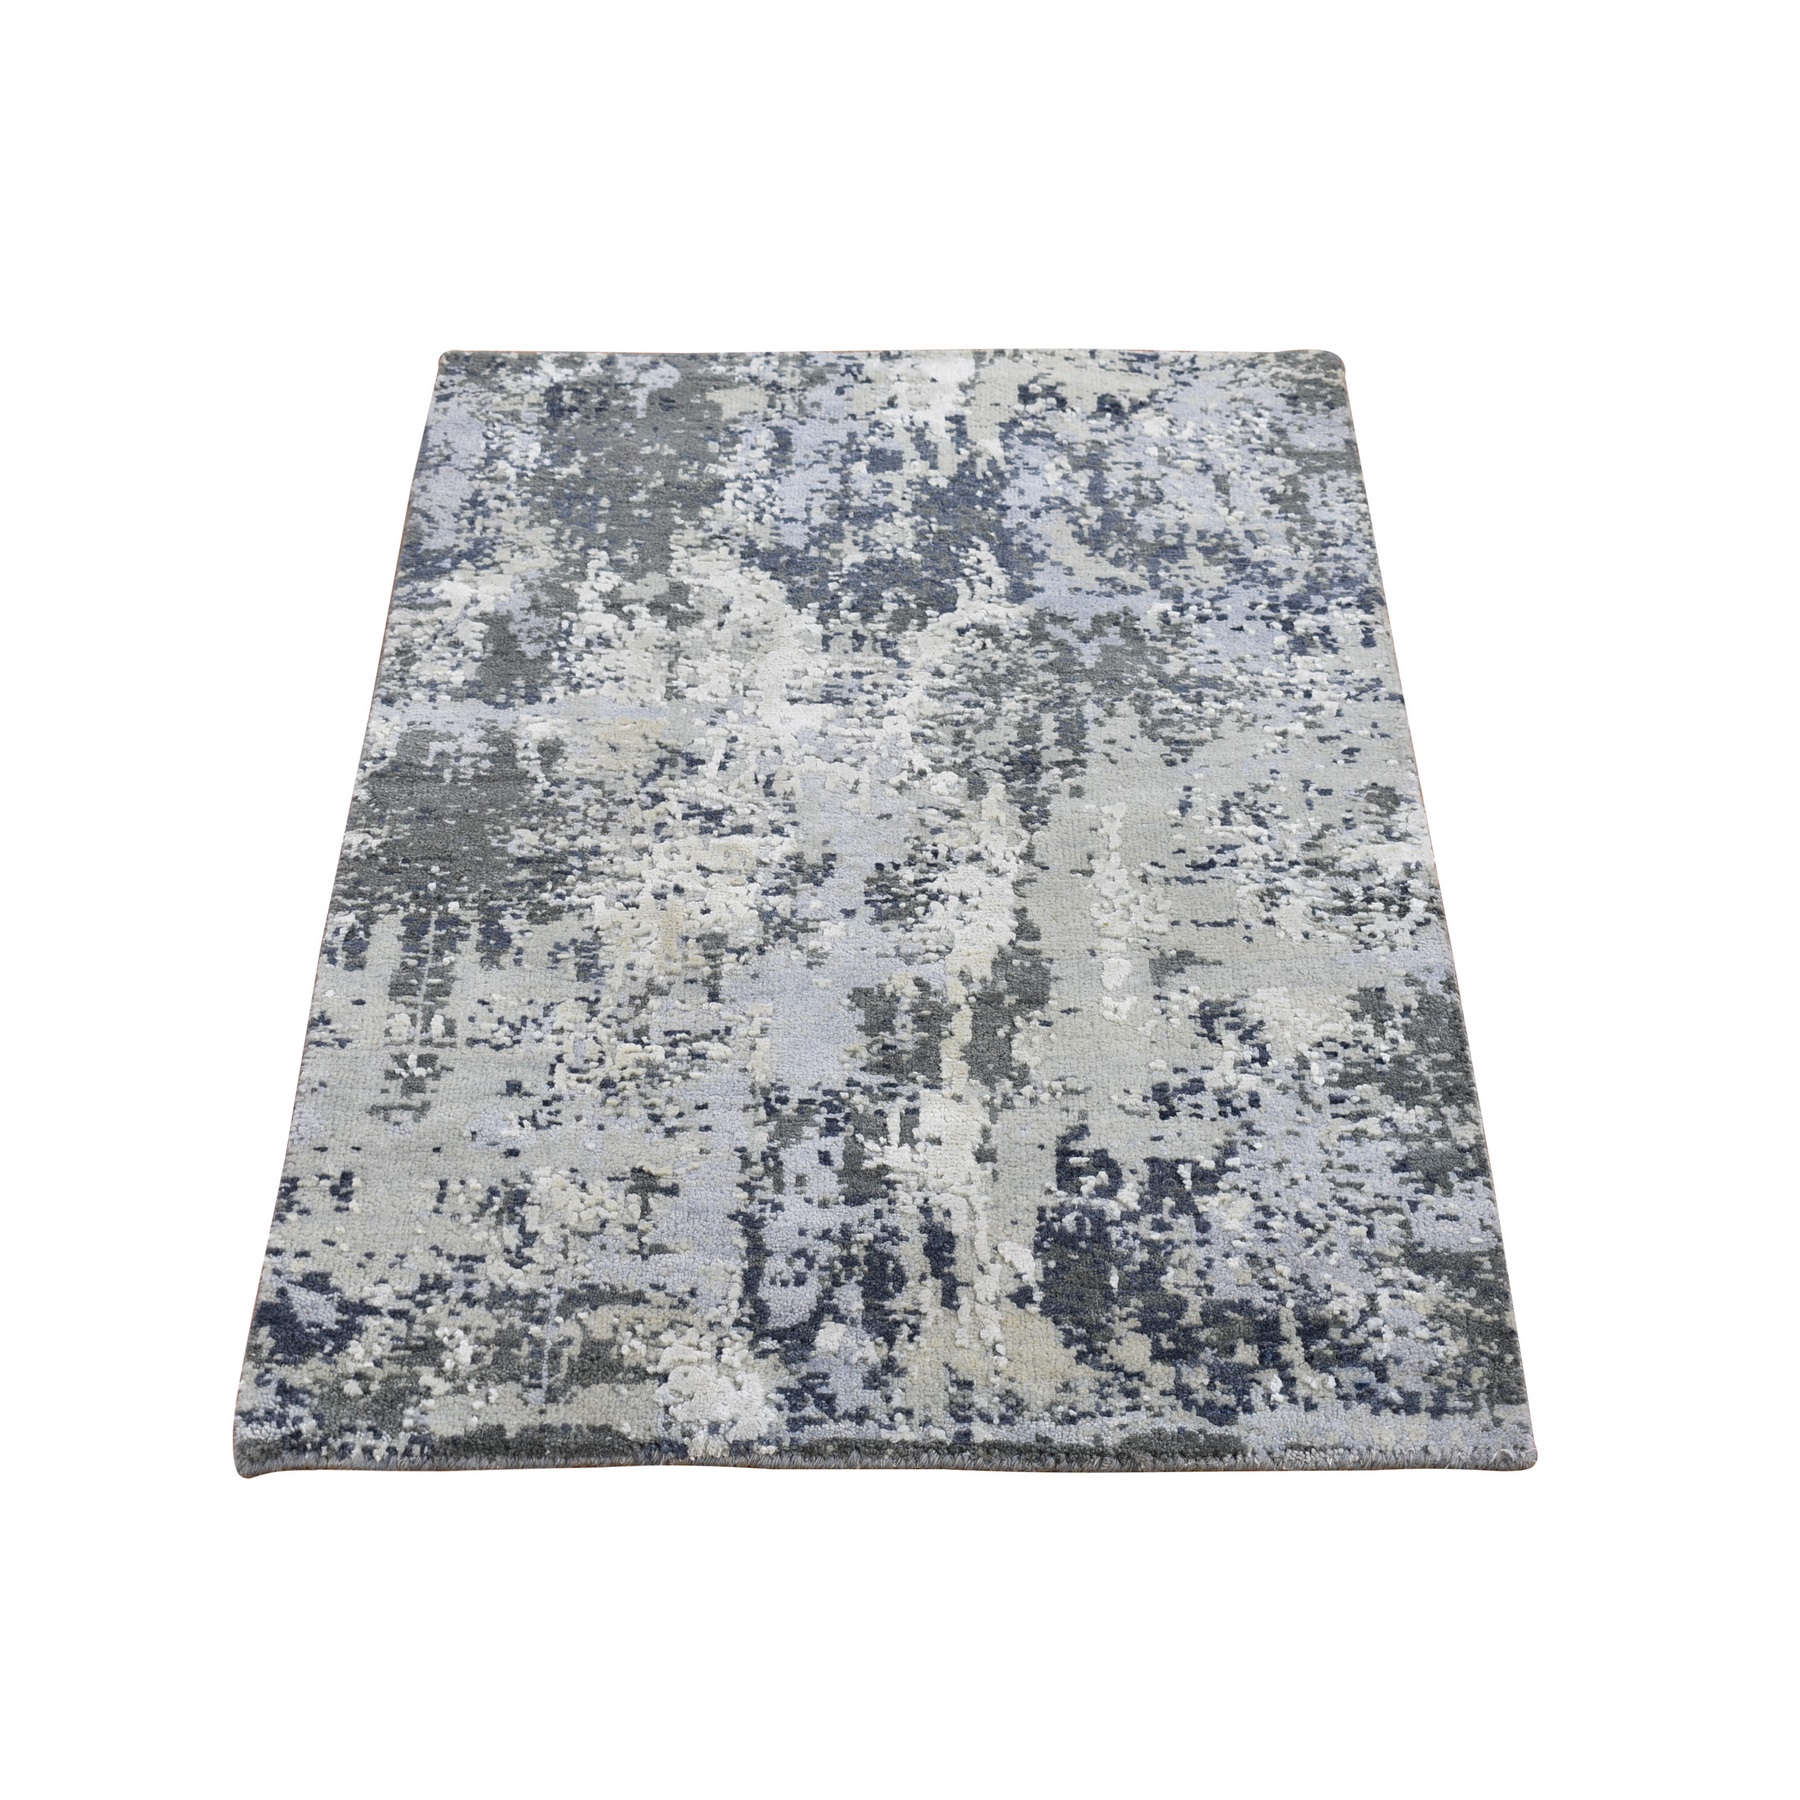 2'1"x3'1" Abstract Design with Persian Knot Wool and Real Silk Denser Weave Gray Hand Woven Oriental Rug 